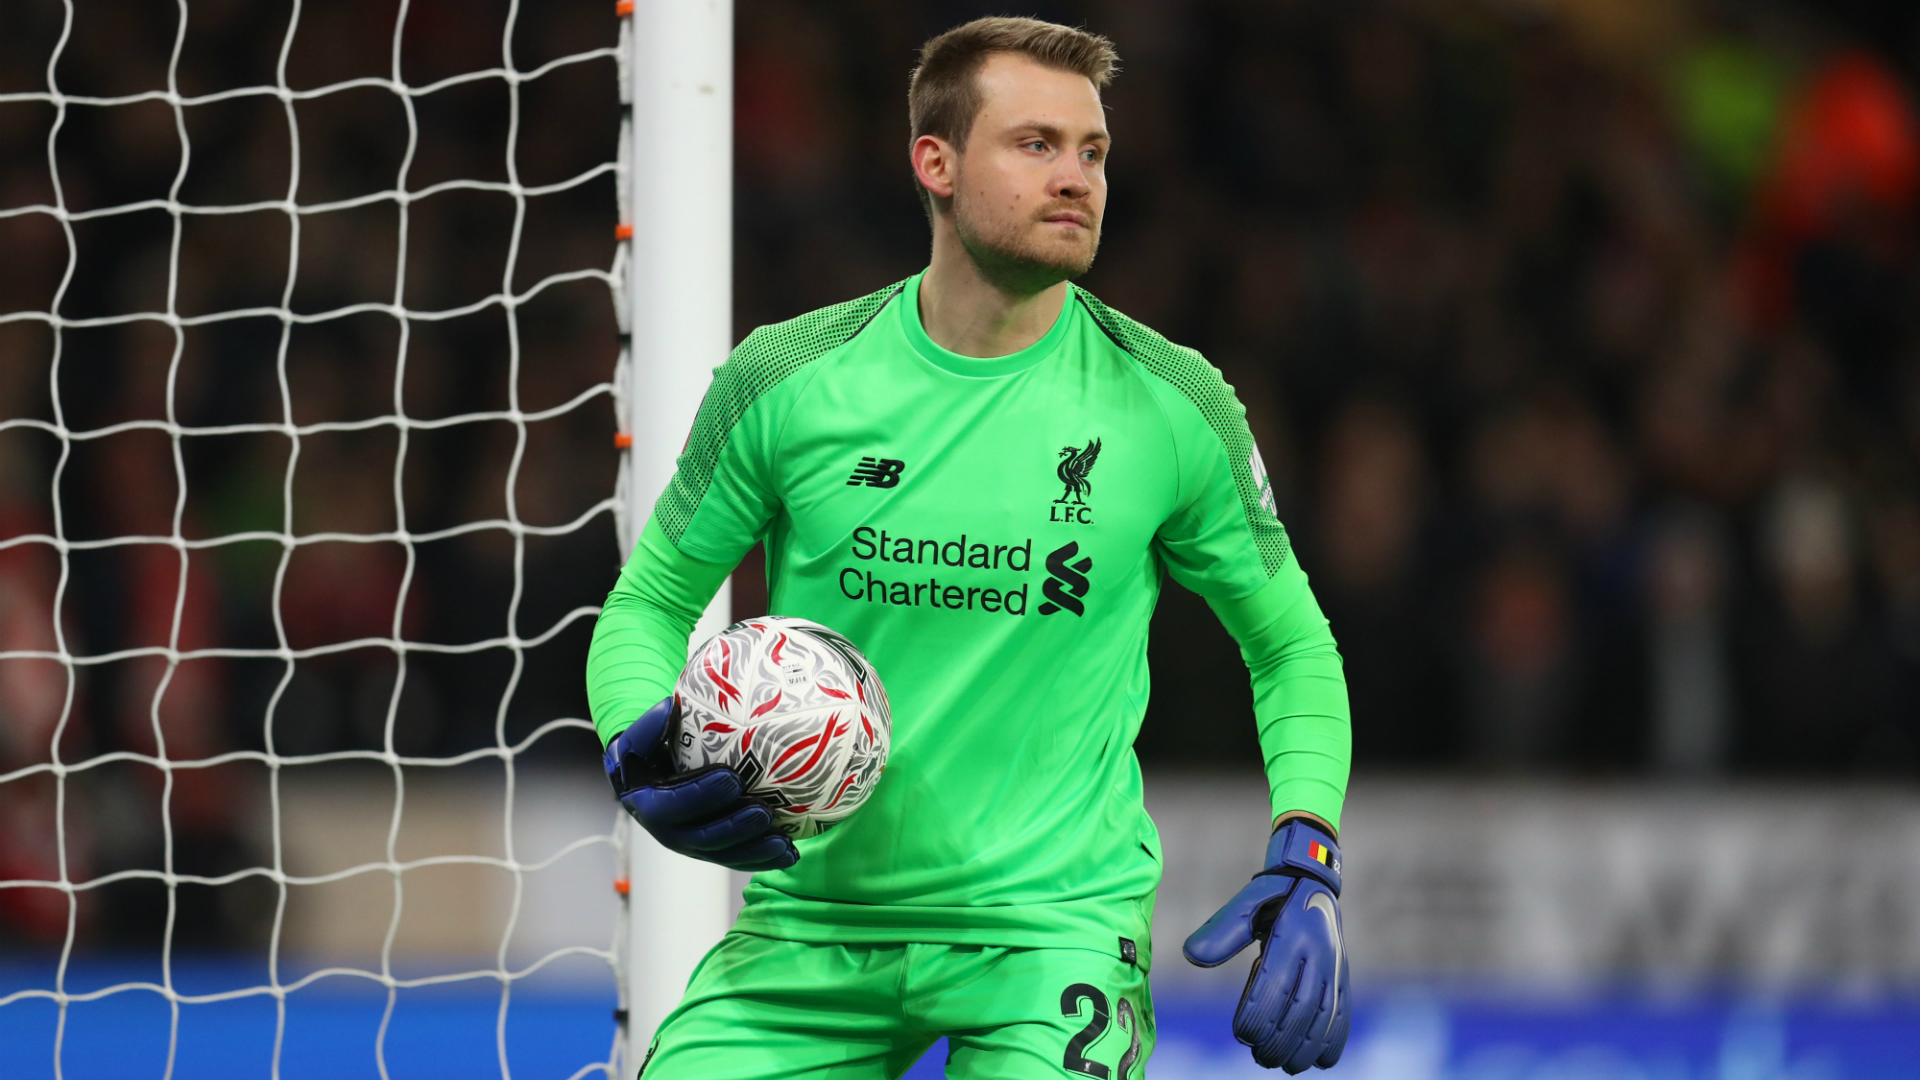 Mignolet set to leave Liverpool for Club Brugge in £8.2m deal